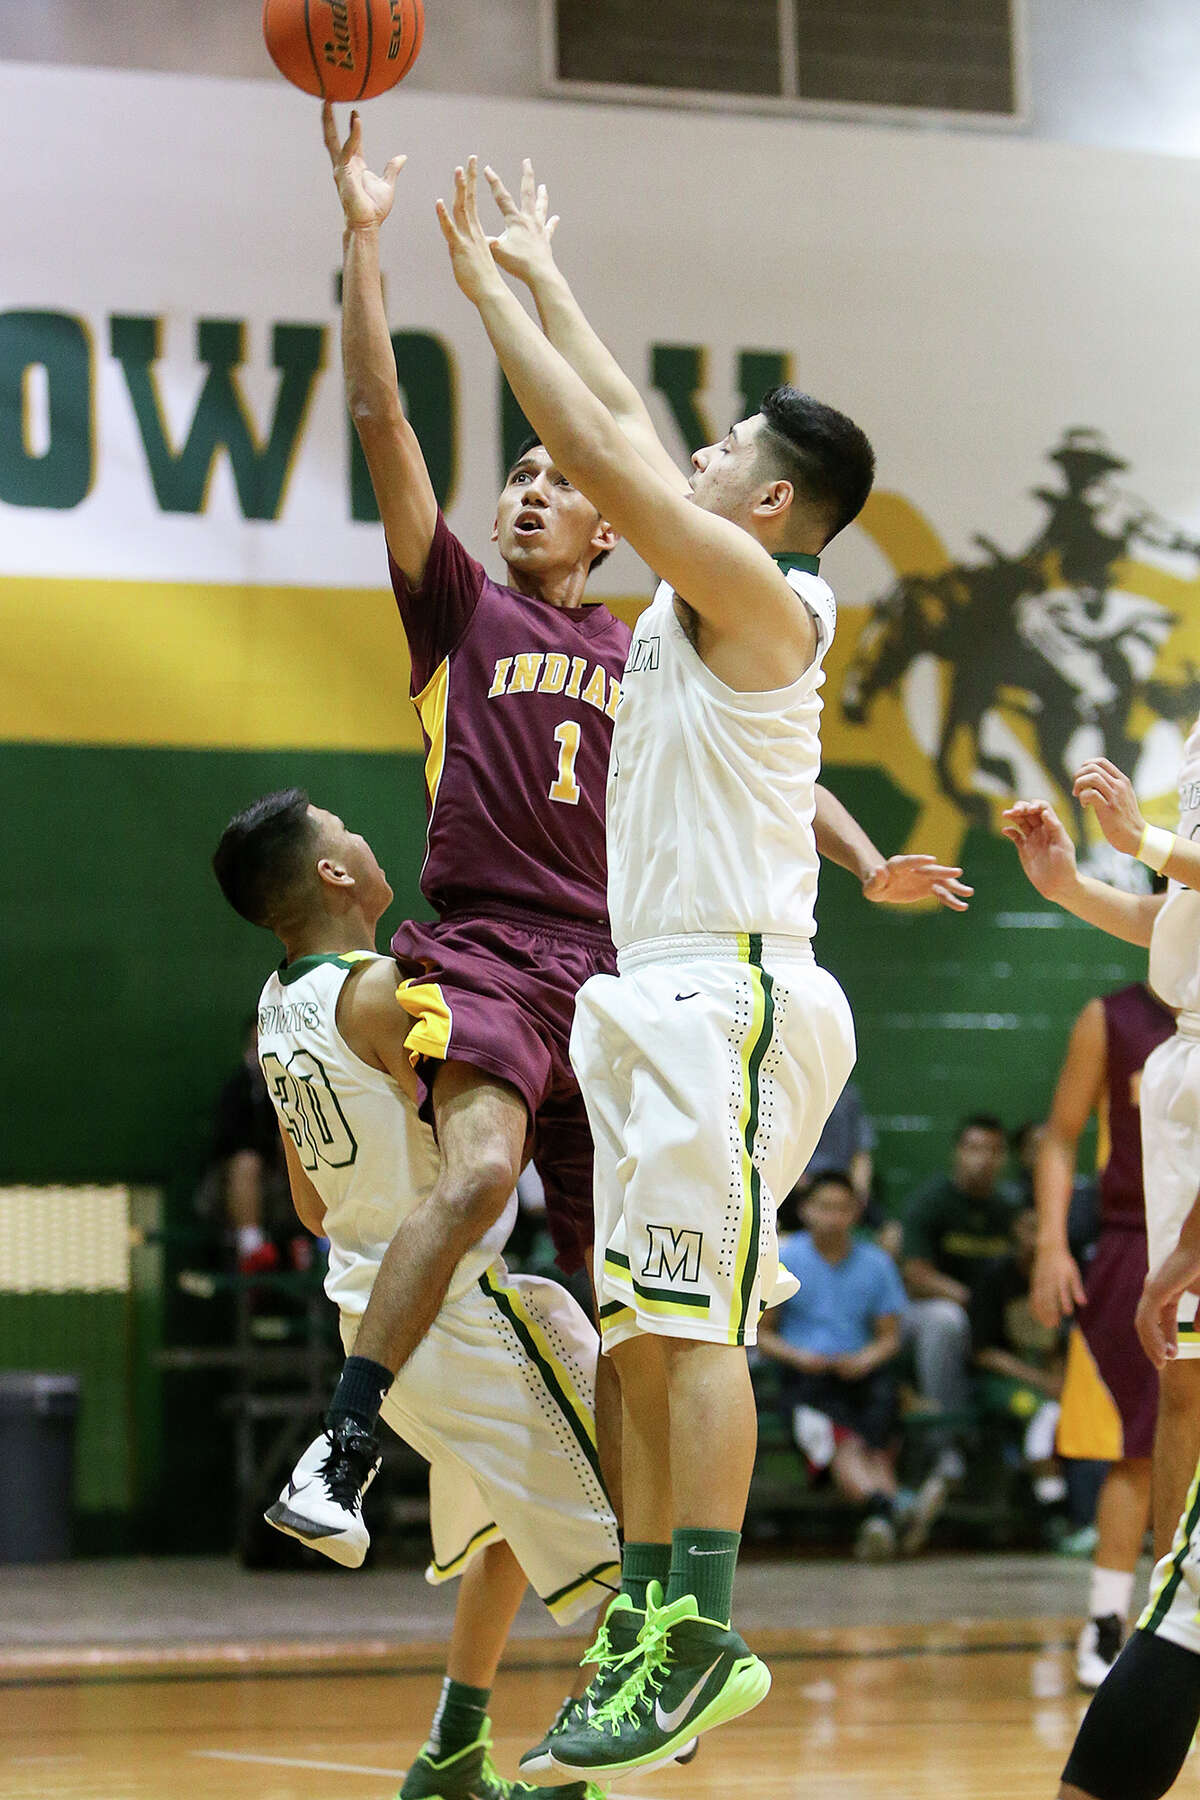 Harlandale's Jesus Maltos (center) shoots between McCollum's Angel Loera (left) and Danny Lerma during the first half of their game at McCollum on Friday, Jan. 16, 2015. McCollum beat Harlandale 52-50. MARVIN PFEIFFER/ mpfeiffer@express-news.net